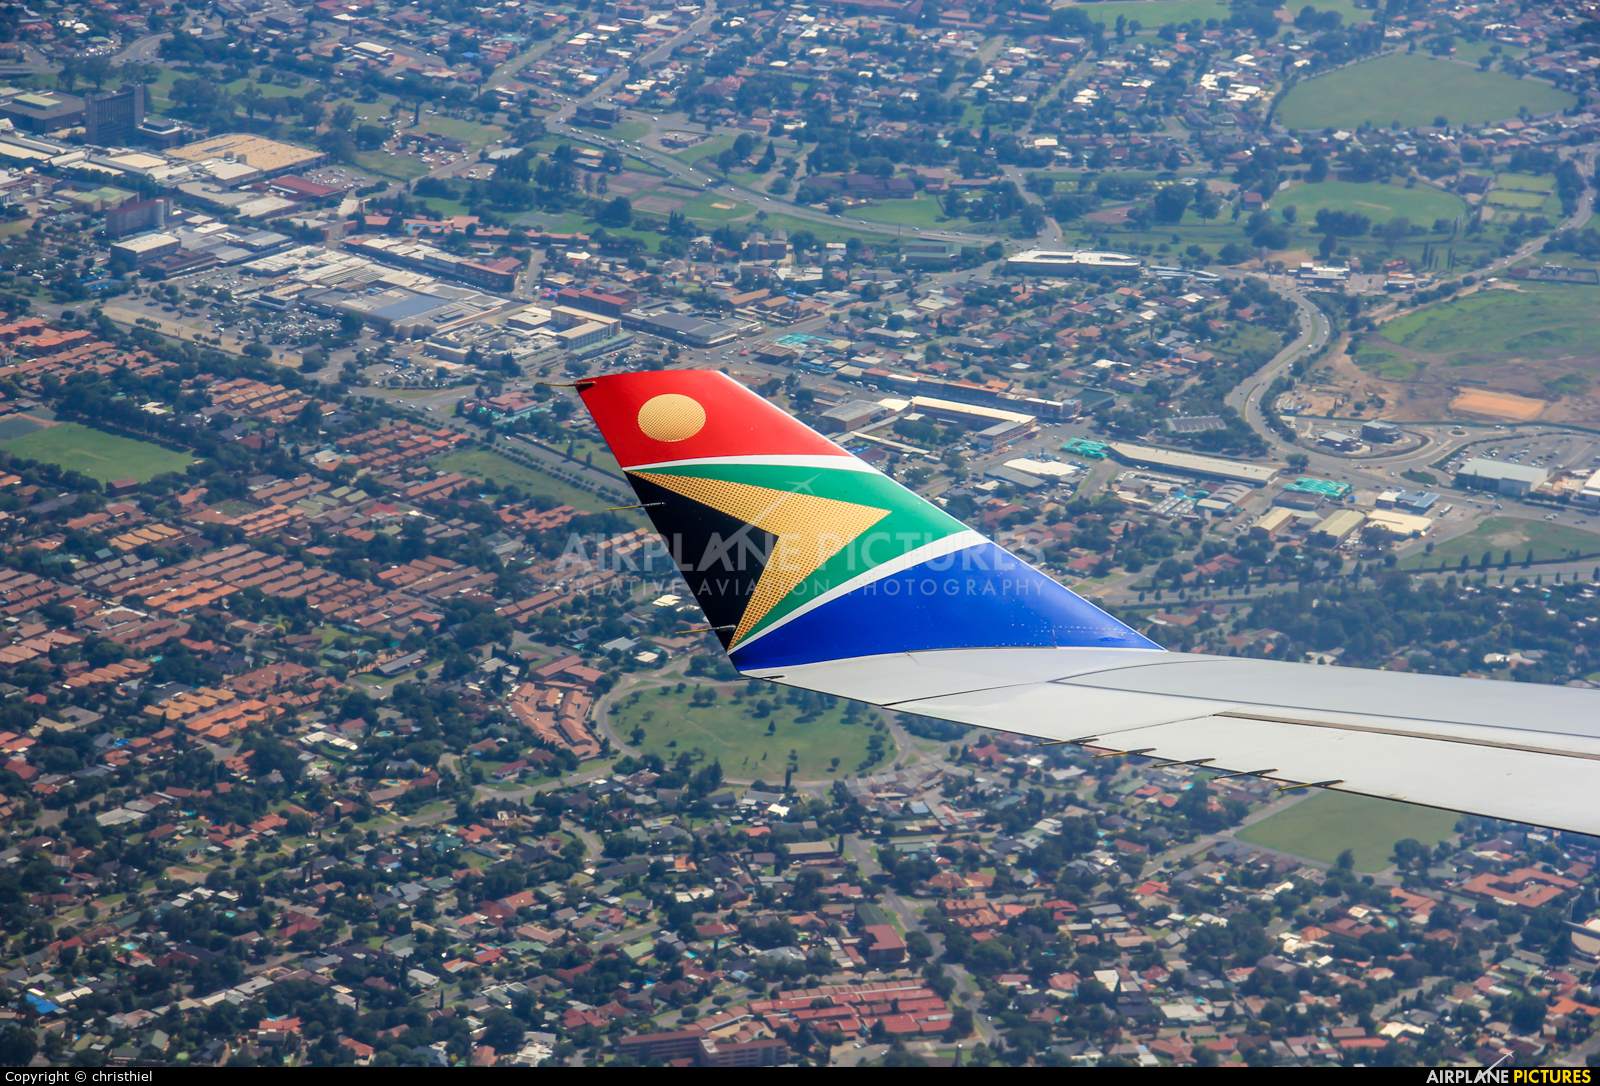 South African Airways ZS-SNB aircraft at In Flight - South Africa